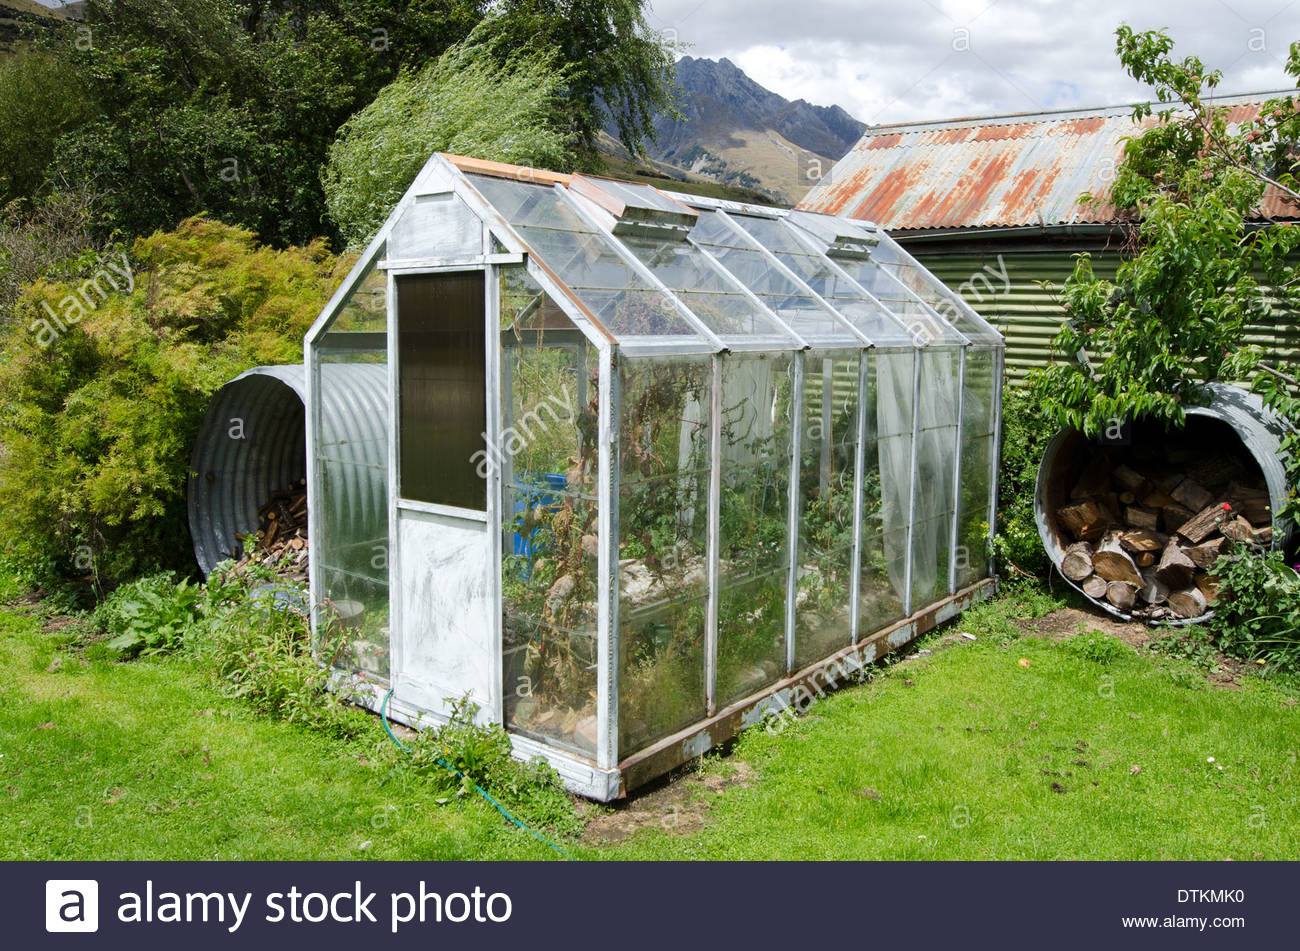 greenhouse in the garden on sunny day DTKMK0